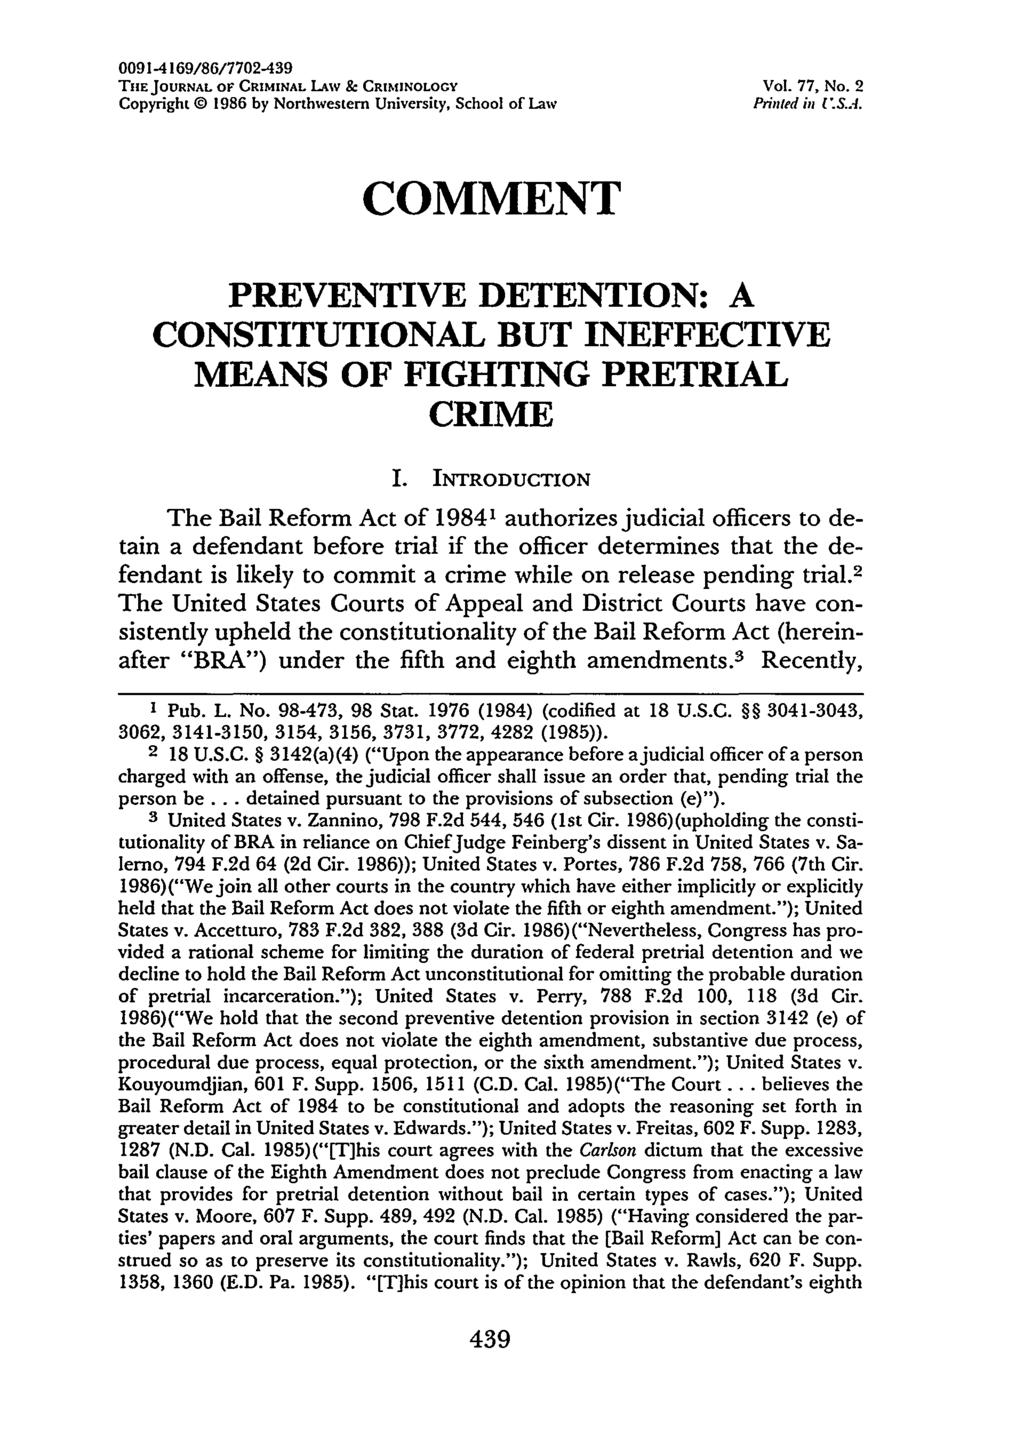 0091-4169/86/7702-439 TilE JOURNAL OF CRIMINAL LAW & CRIMINOLOGY Vol. 77, No. 2 Copyright 1986 by Northwestern University, School of Law Printed US.A. COMMENT PREVENTIVE DETENTION: A CONSTITUTIONAL BUT INEFFECTIVE MEANS OF FIGHTING PRETRIAL CRIME I.